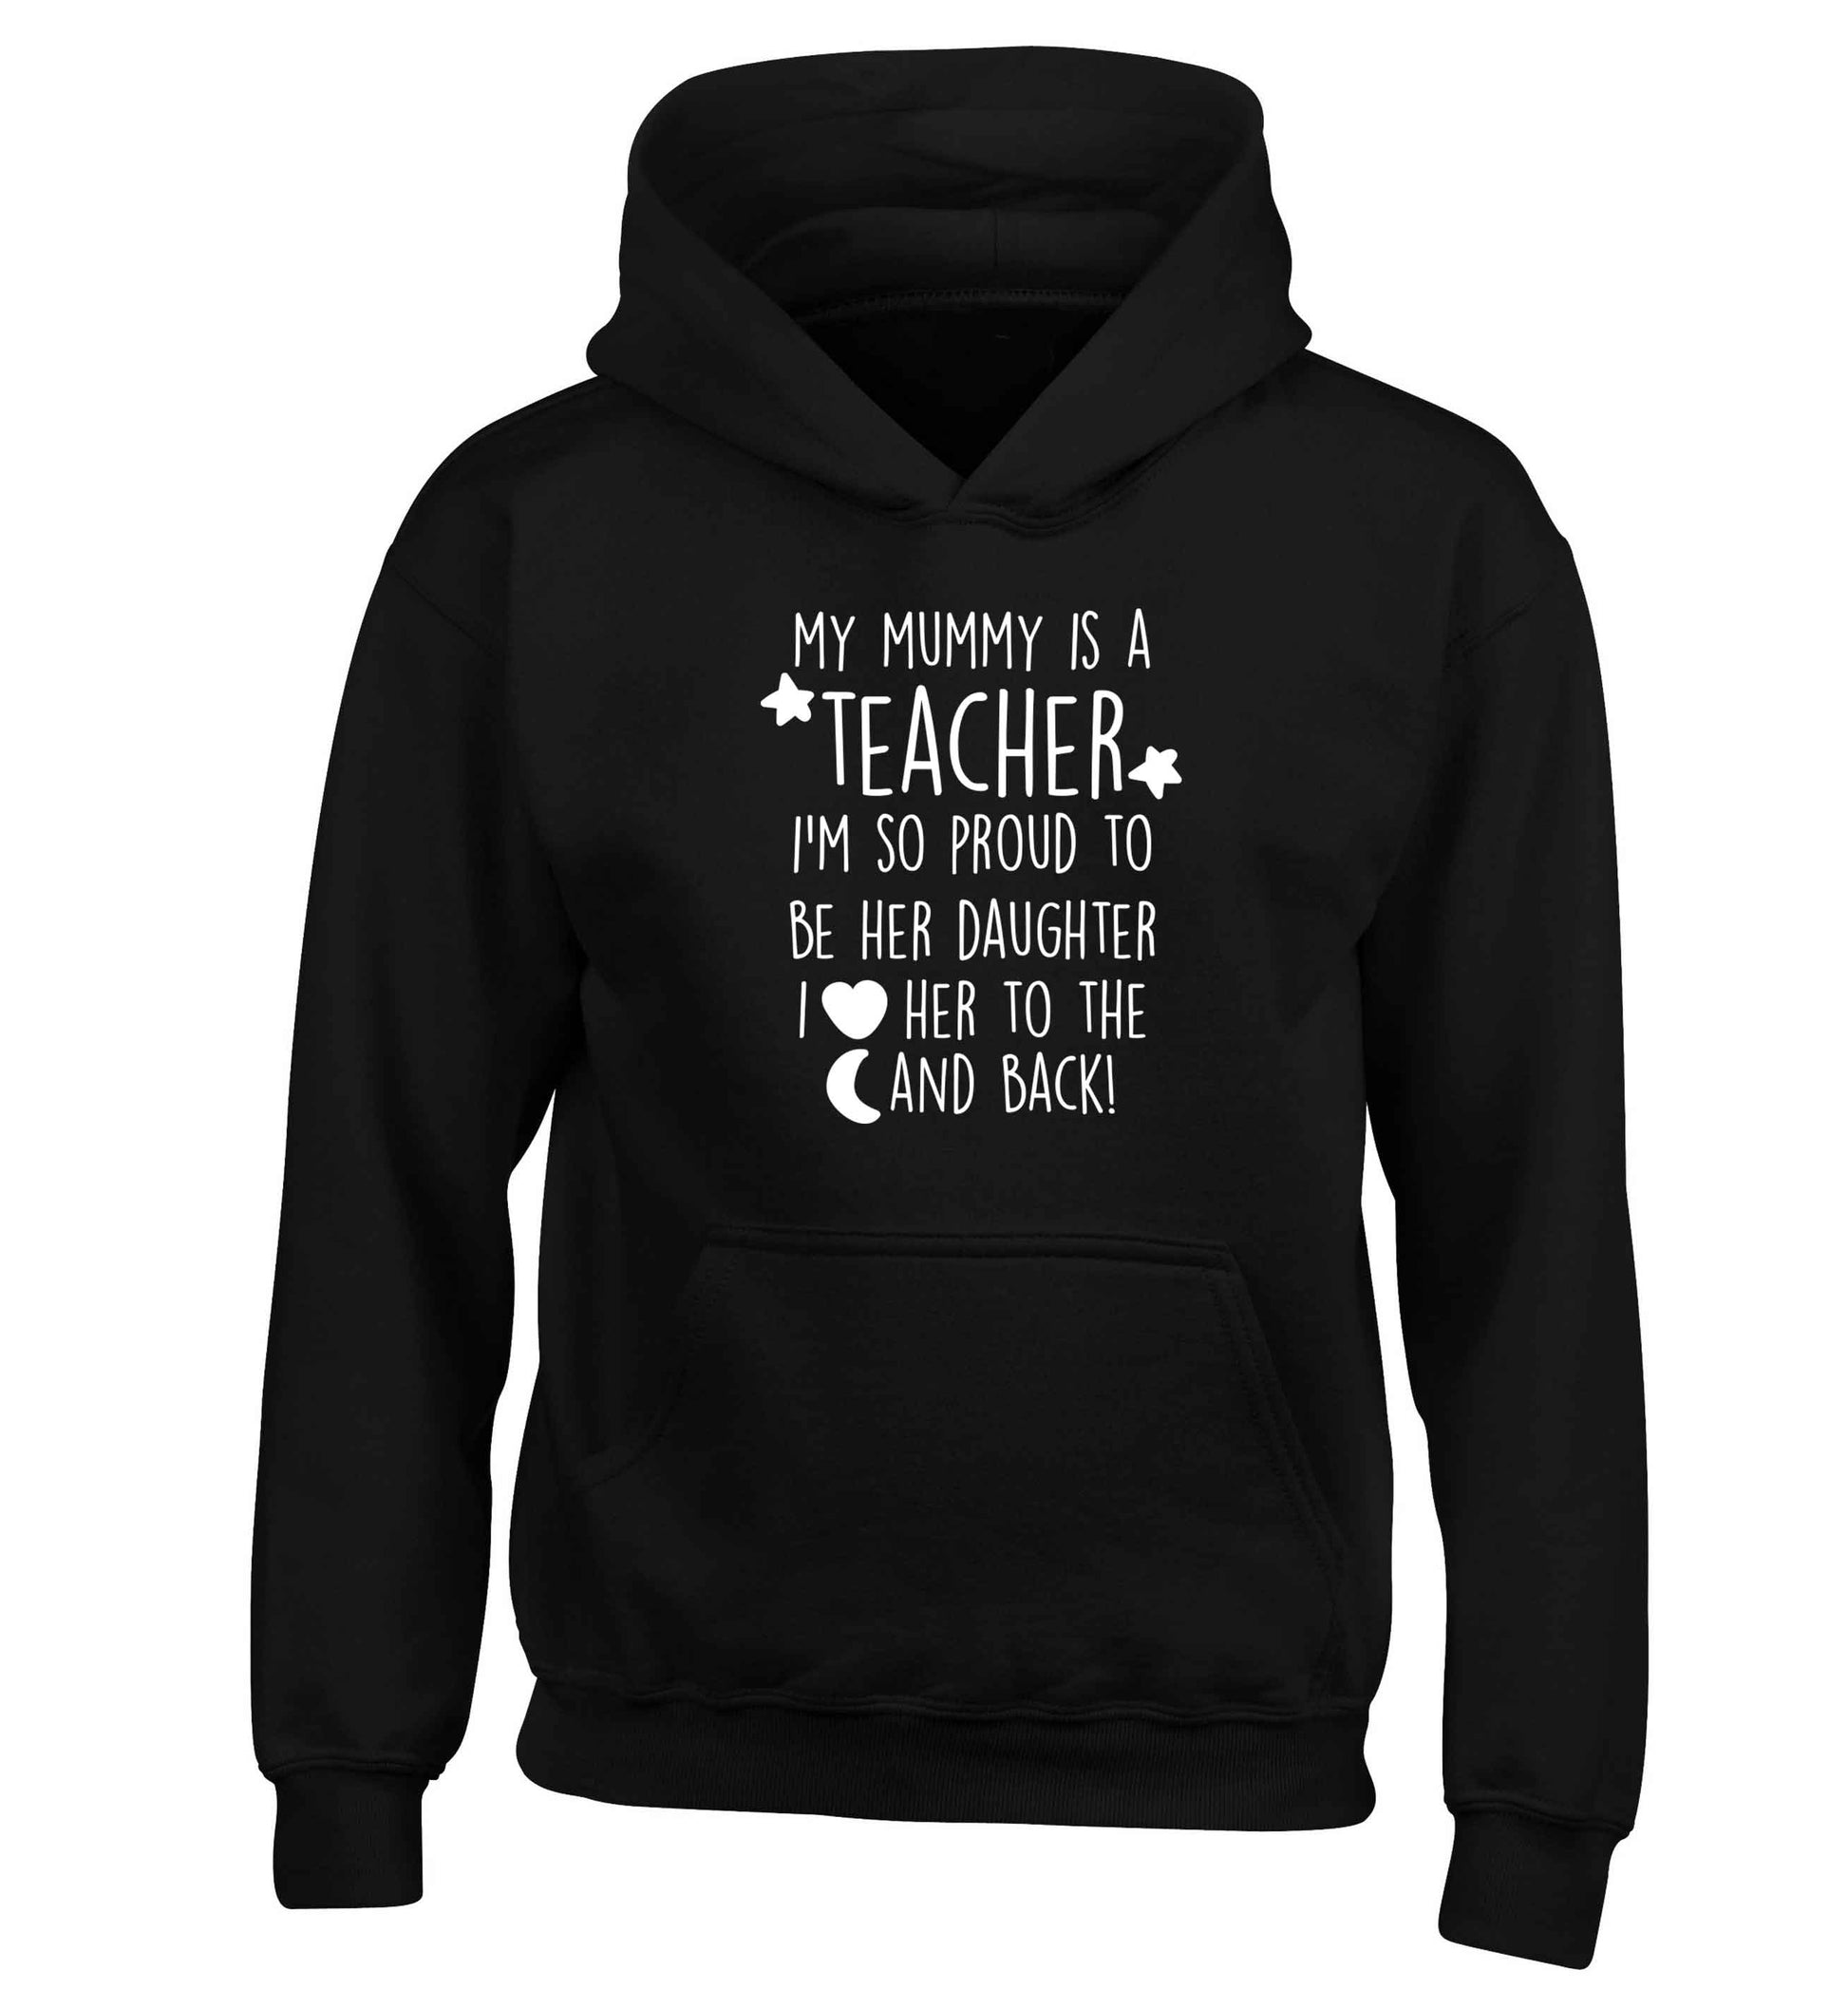 My mummy is a teacher I'm so proud to be her daughter I love her to the moon and back children's black hoodie 12-13 Years